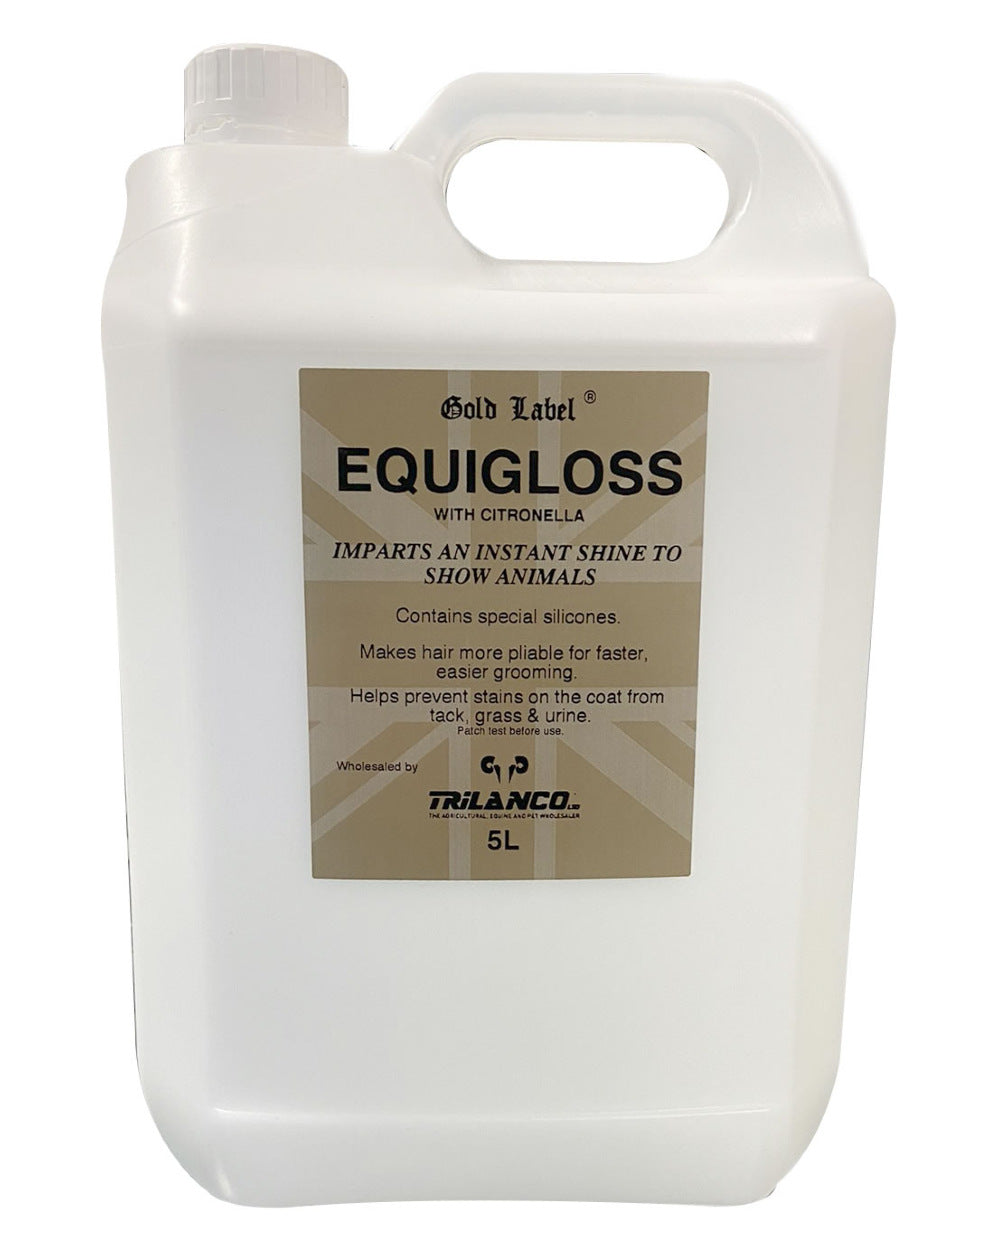 Gold Label Equigloss On A White Background